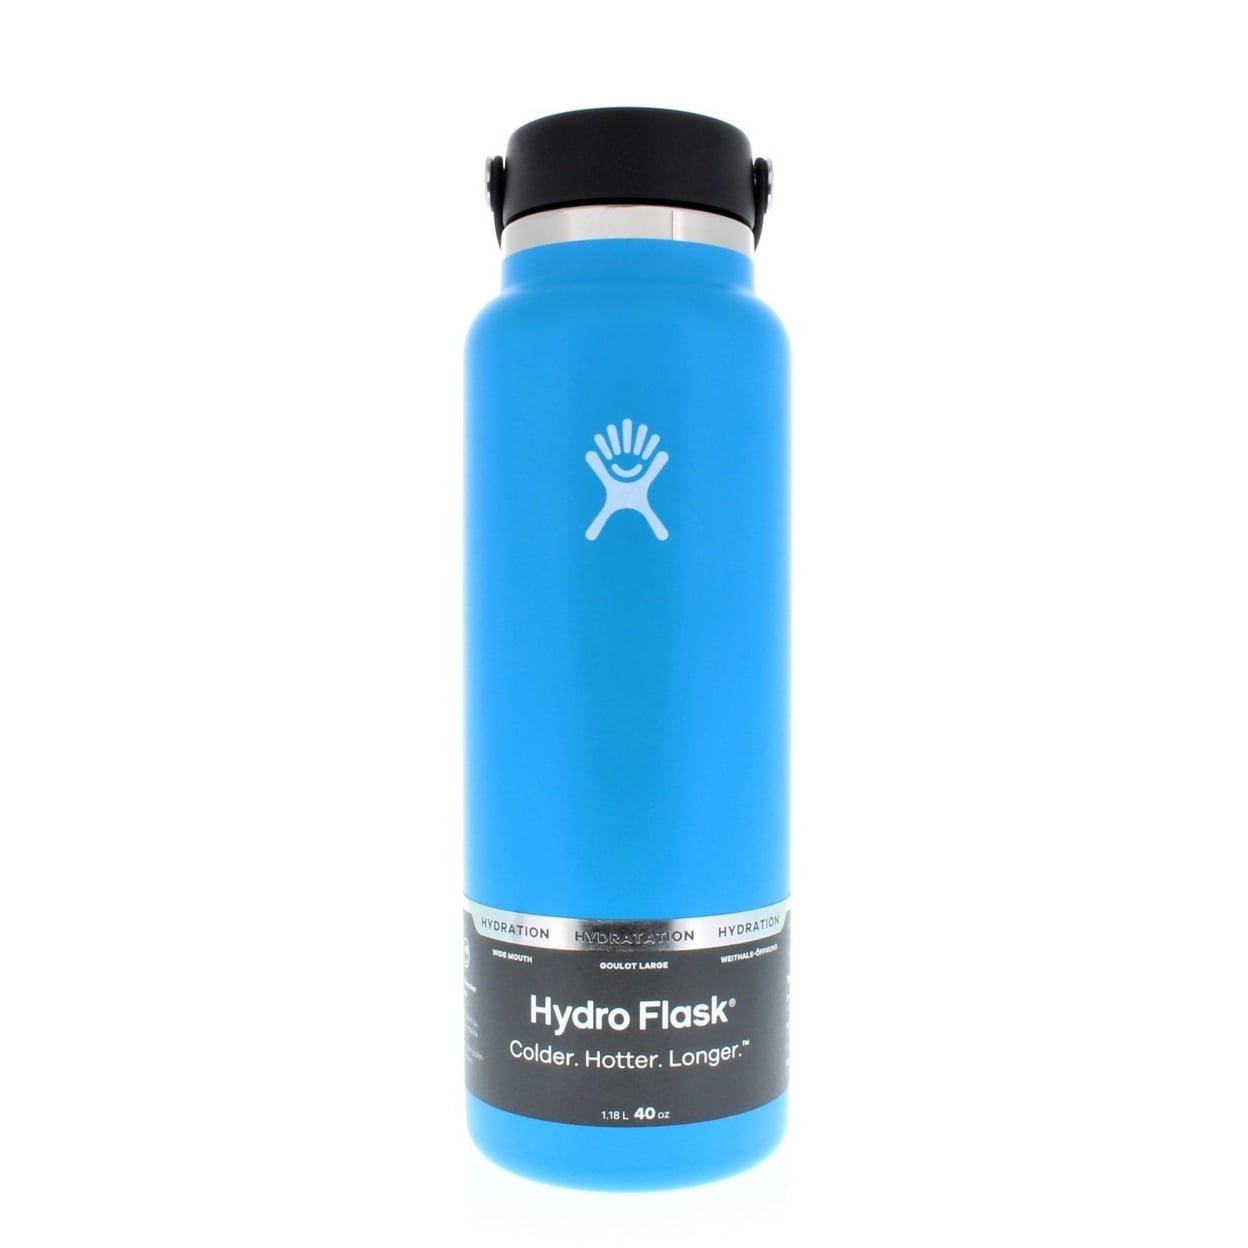 Hydro Flask 40oz Wide Mouth Bottle, Pacific 